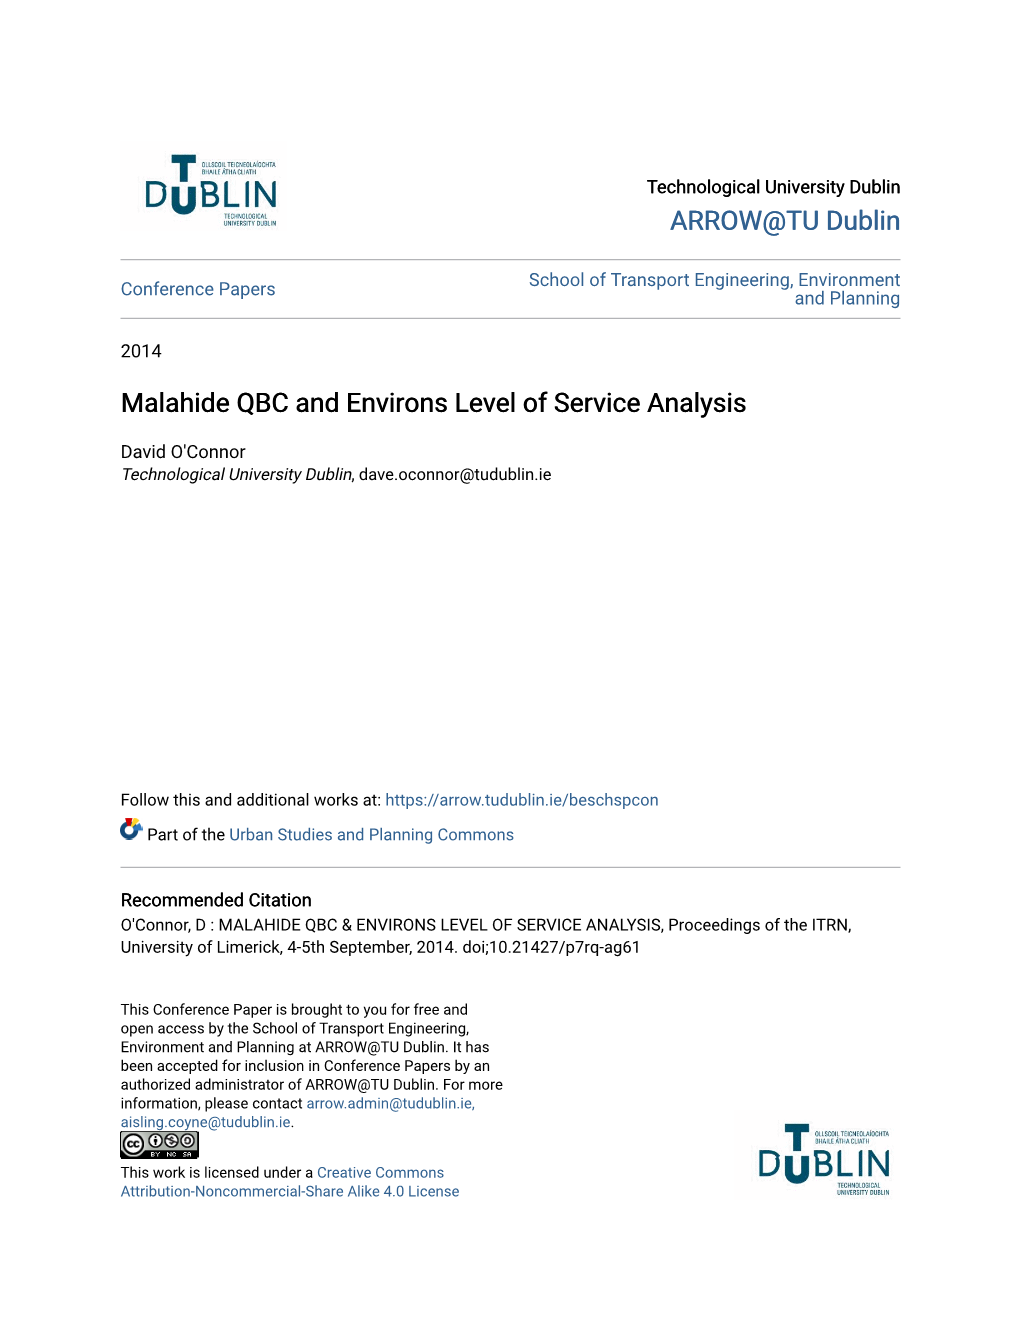 Malahide QBC and Environs Level of Service Analysis